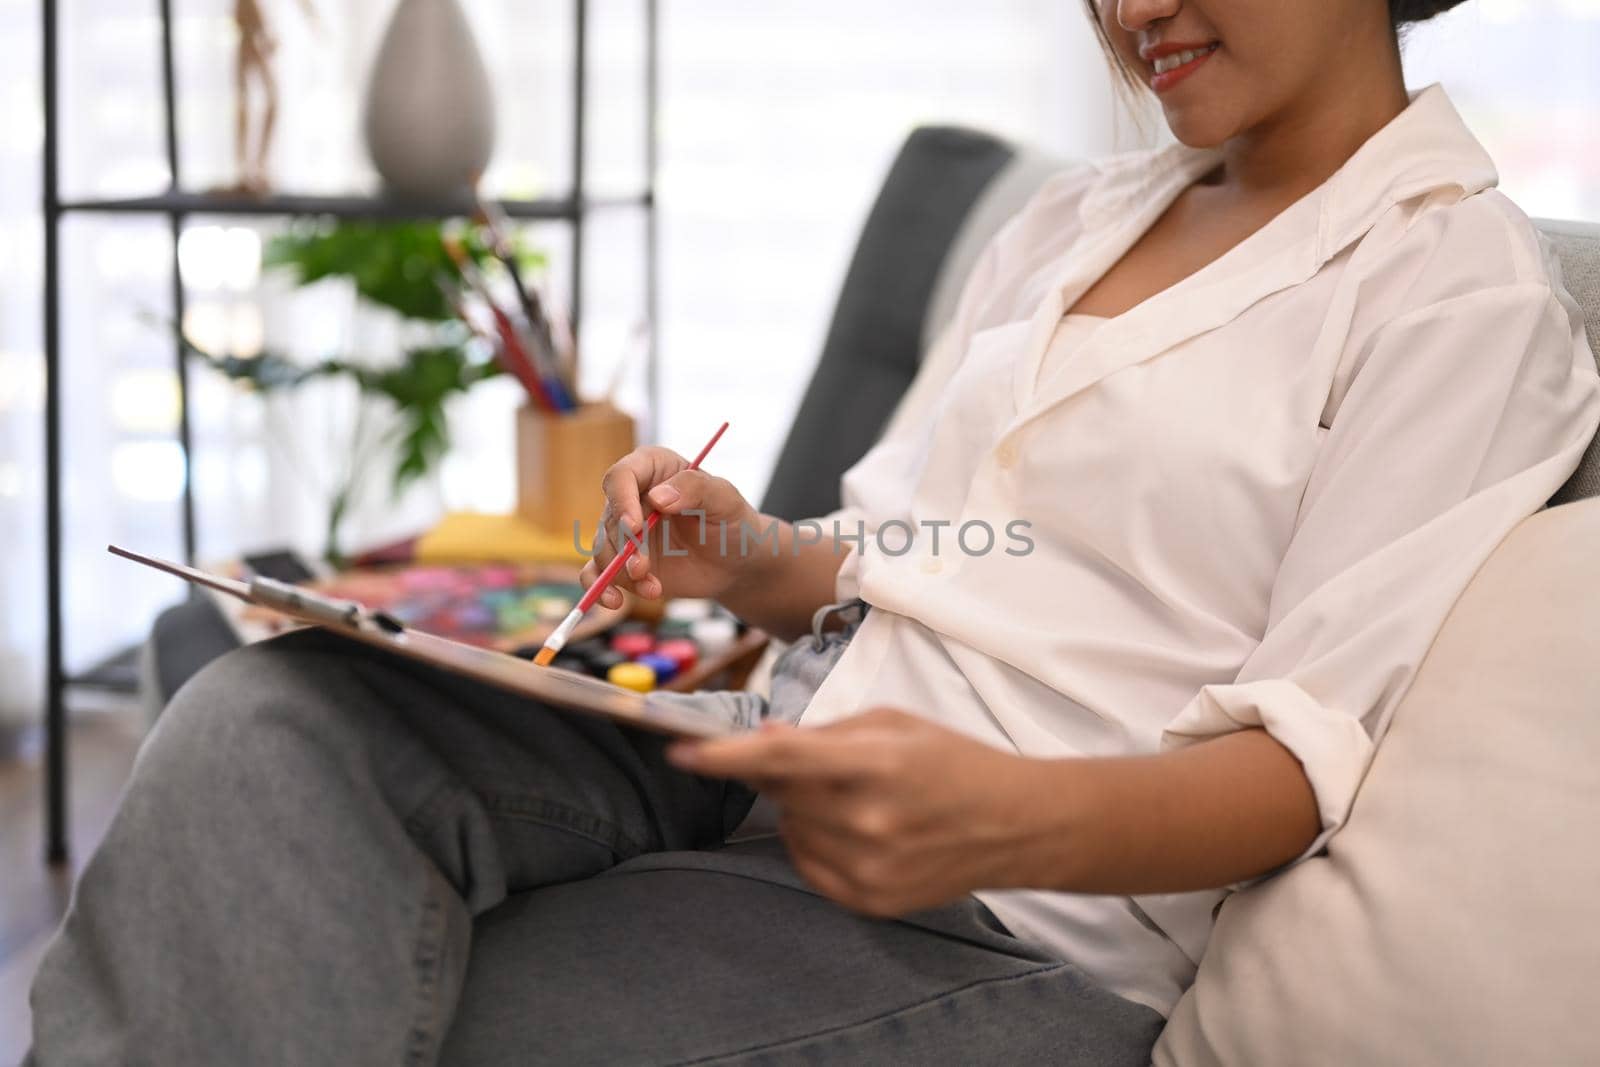 Relaxed young woman sitting on couch and painting picture with watercolor. Art, creative hobby and leisure activity concept.